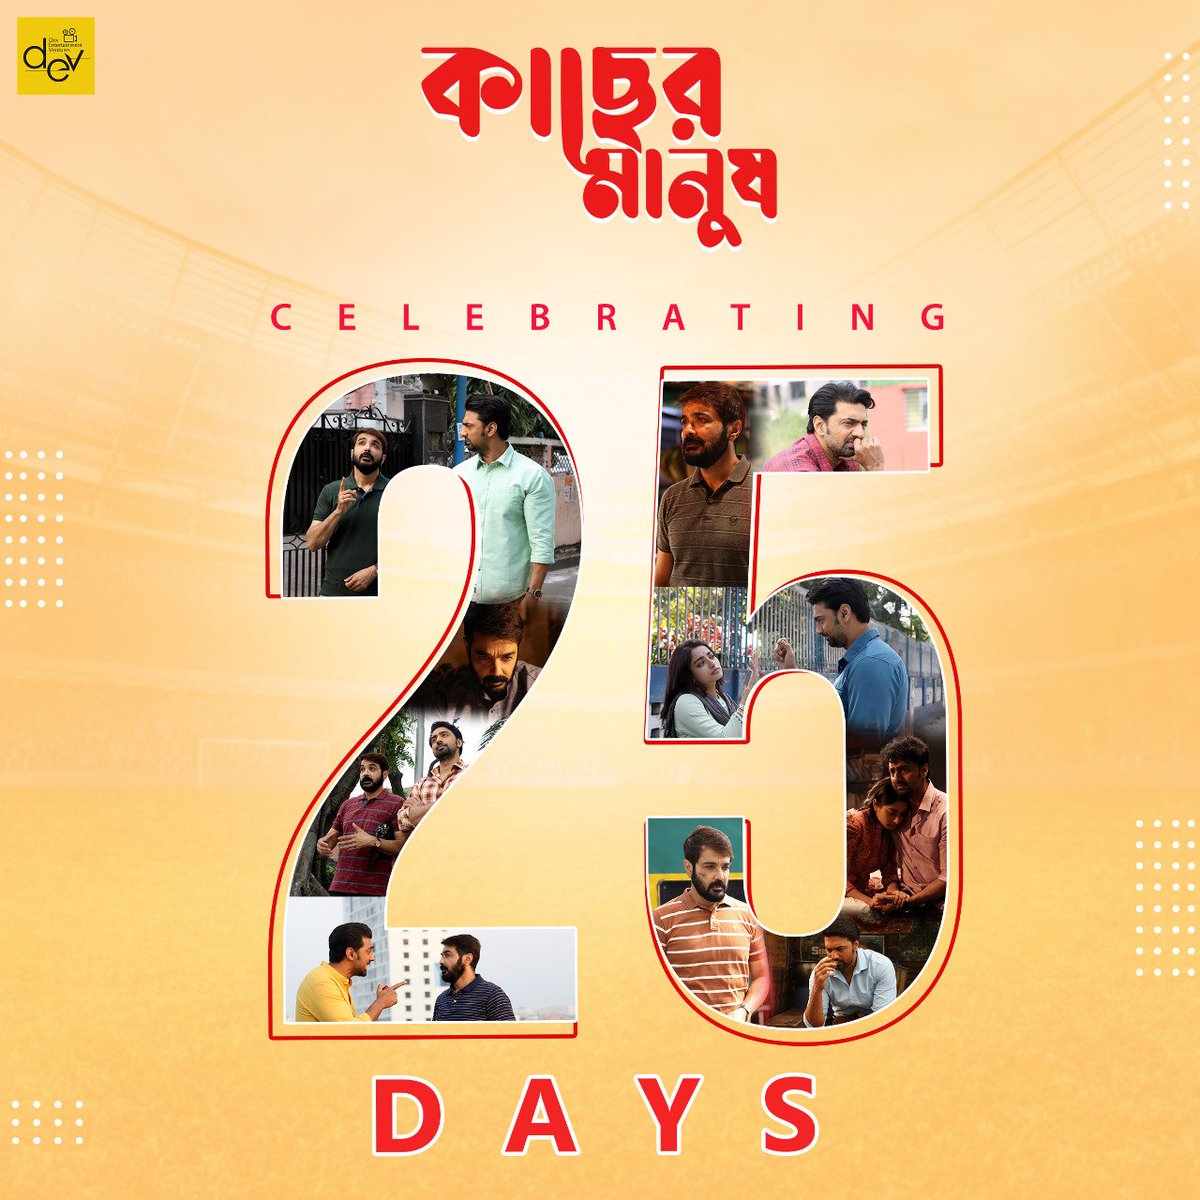 It's with your love and support that #KacherManush has completed 25 days running succesfully in theatres. We would like to express our immense gratitude to one and all who have been there with us on this journey. #25DaysOfKacherManush #RunningSuccessfully